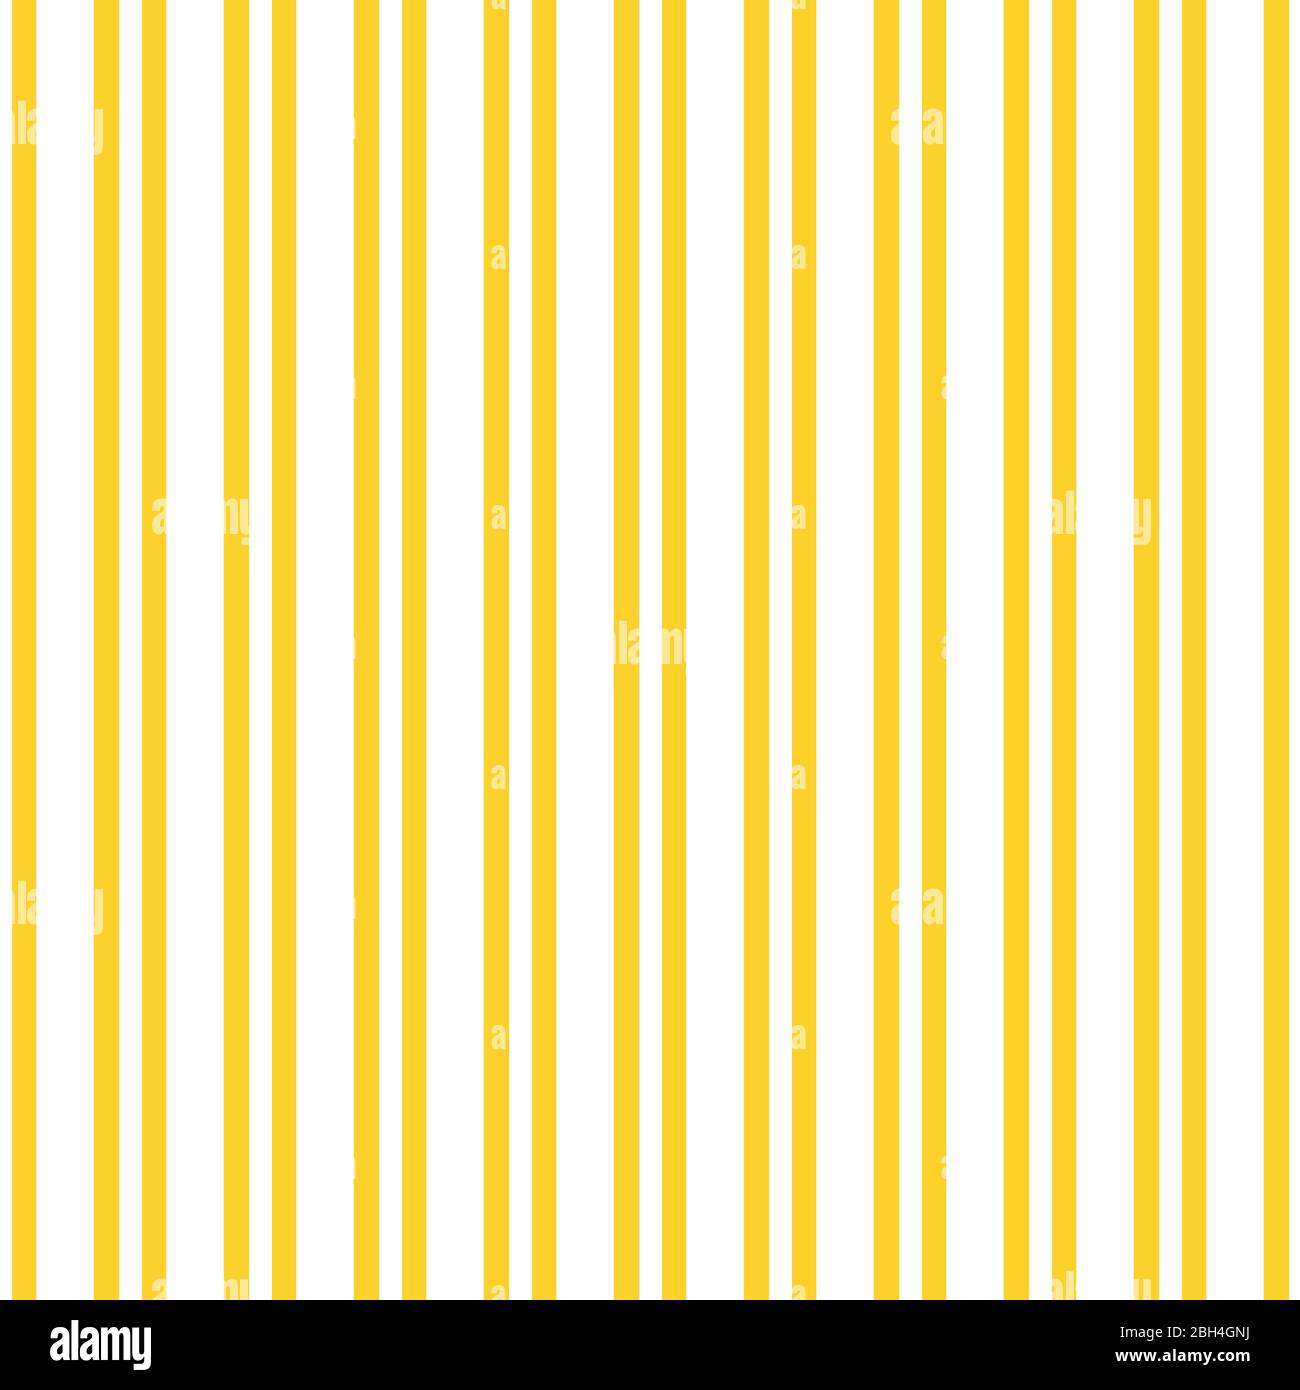 Abstract vector striped seamless pattern with colored stripes. Colorful pastel background Stock Vector